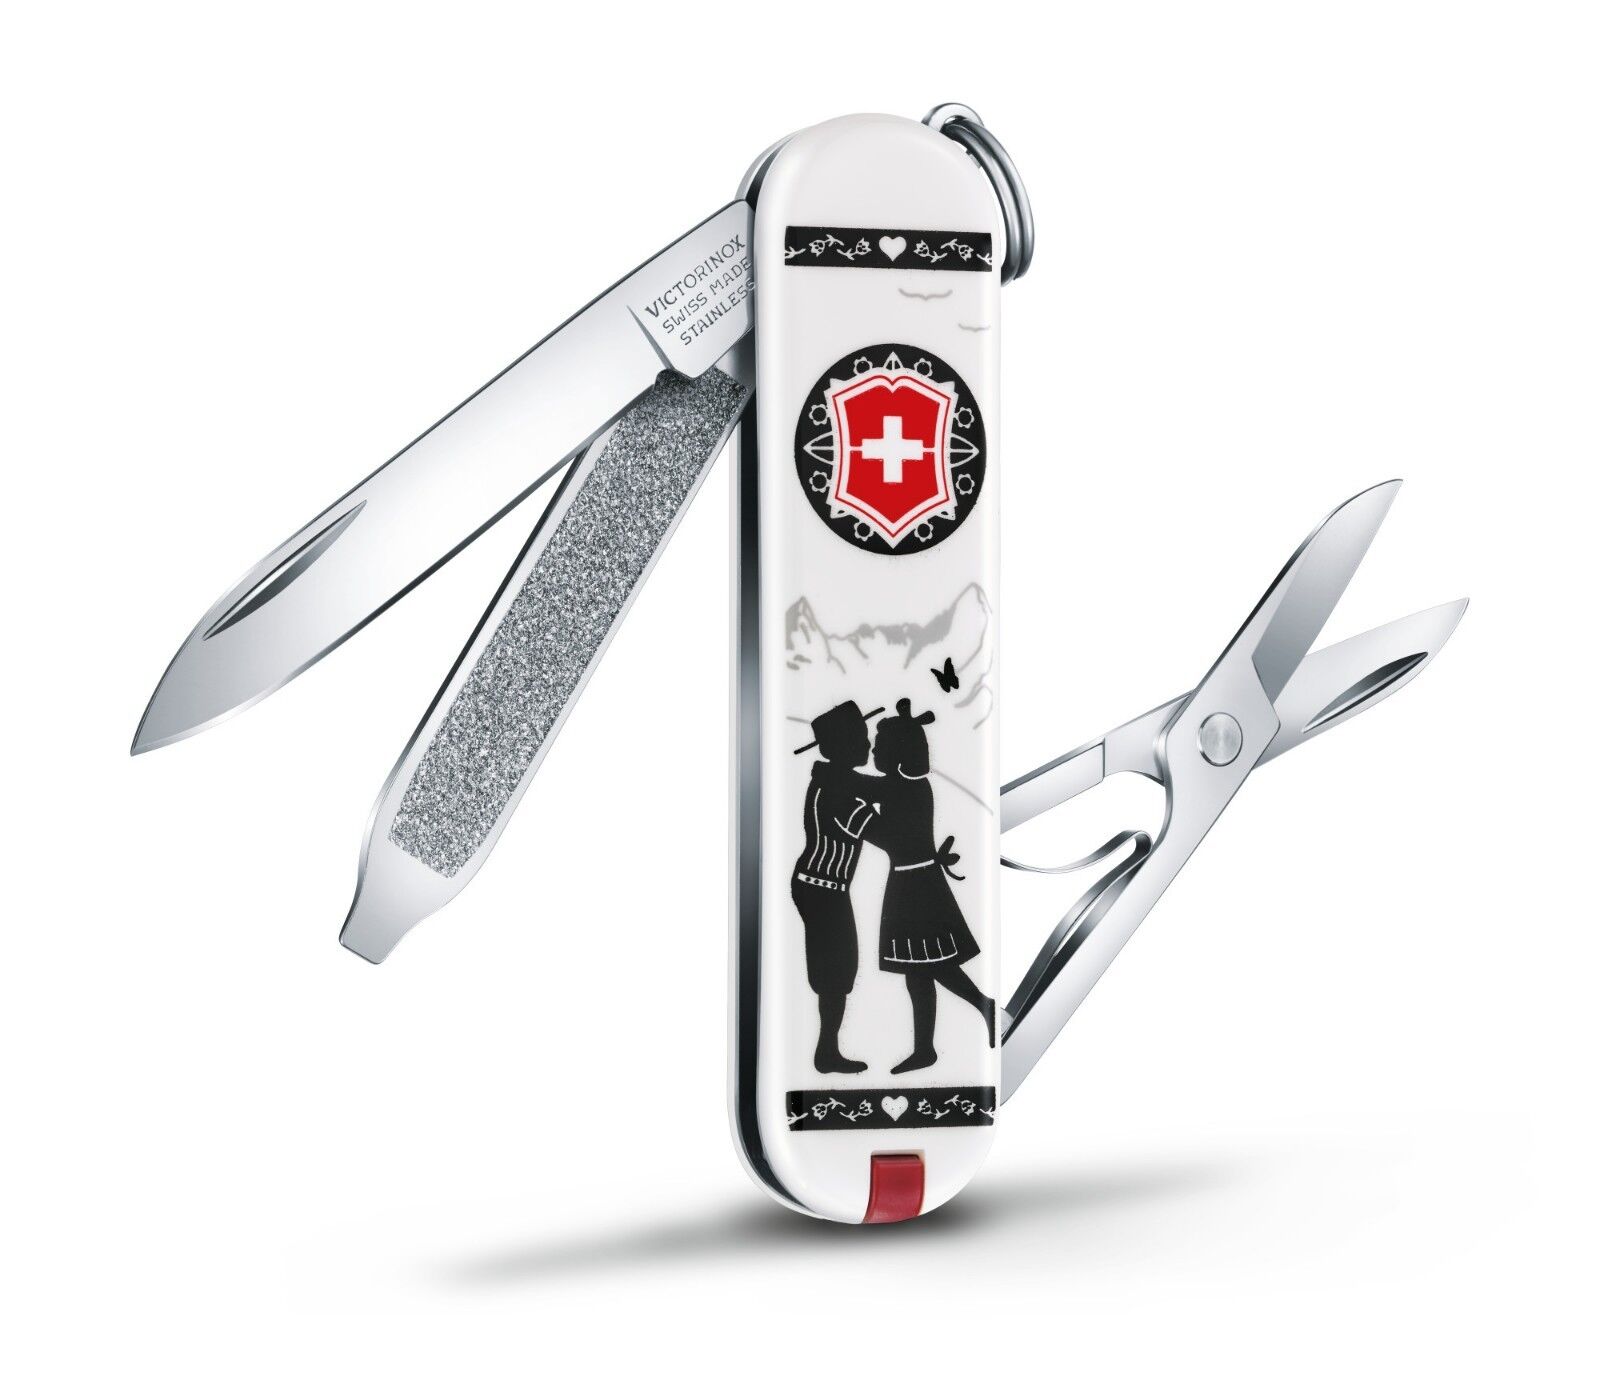 🌟🌟 VICTORINOX CLASSIC SD KNIFE 2018 LIMITED EDITION ALPS LOVE 0.6223.L1801US2 